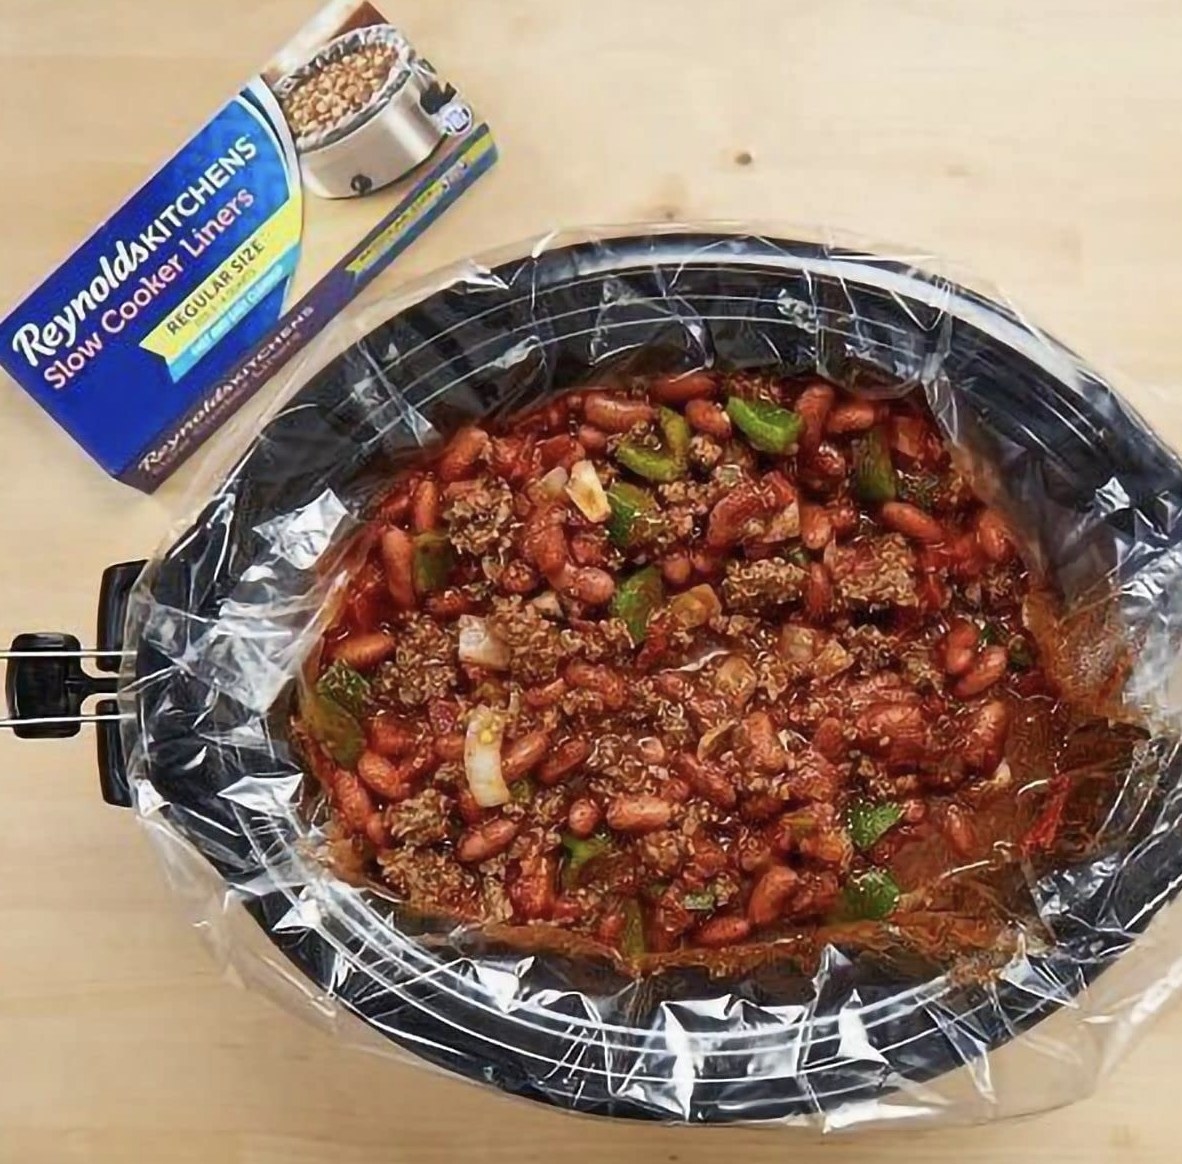 A slow cooker with liner and chili in it